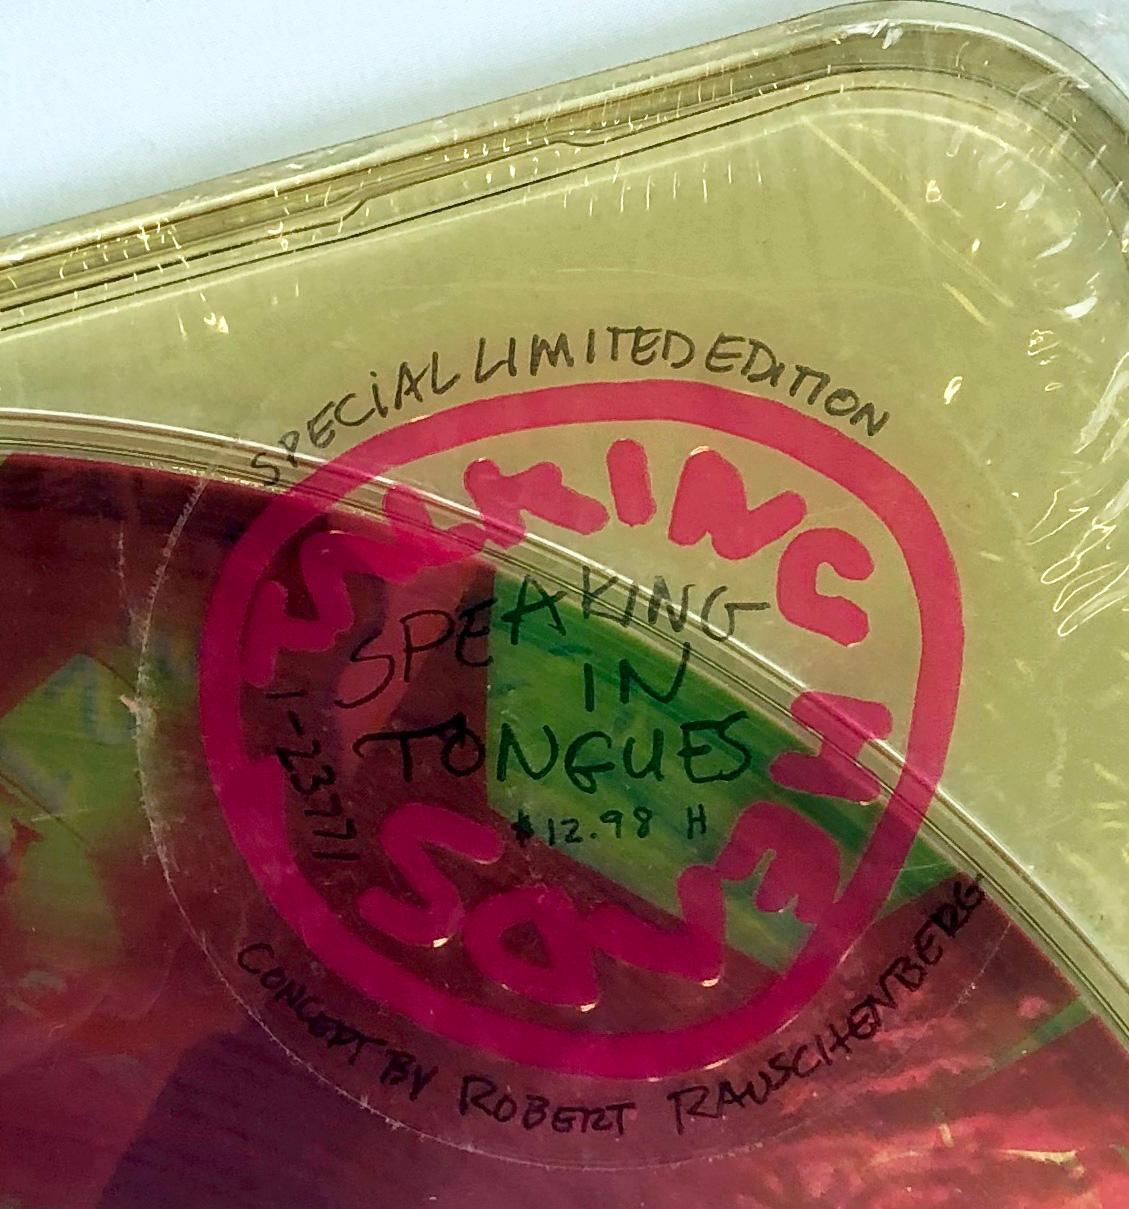 Rare unopened Robert Rauschenberg designed Talking Heads Speaking in Tongues: 
In 1983, legendary pop artist Robert Rauschenberg designed the album cover for Talking Heads’ acclaimed studio album, Speaking in Tongues.  Rauschenberg’s design features